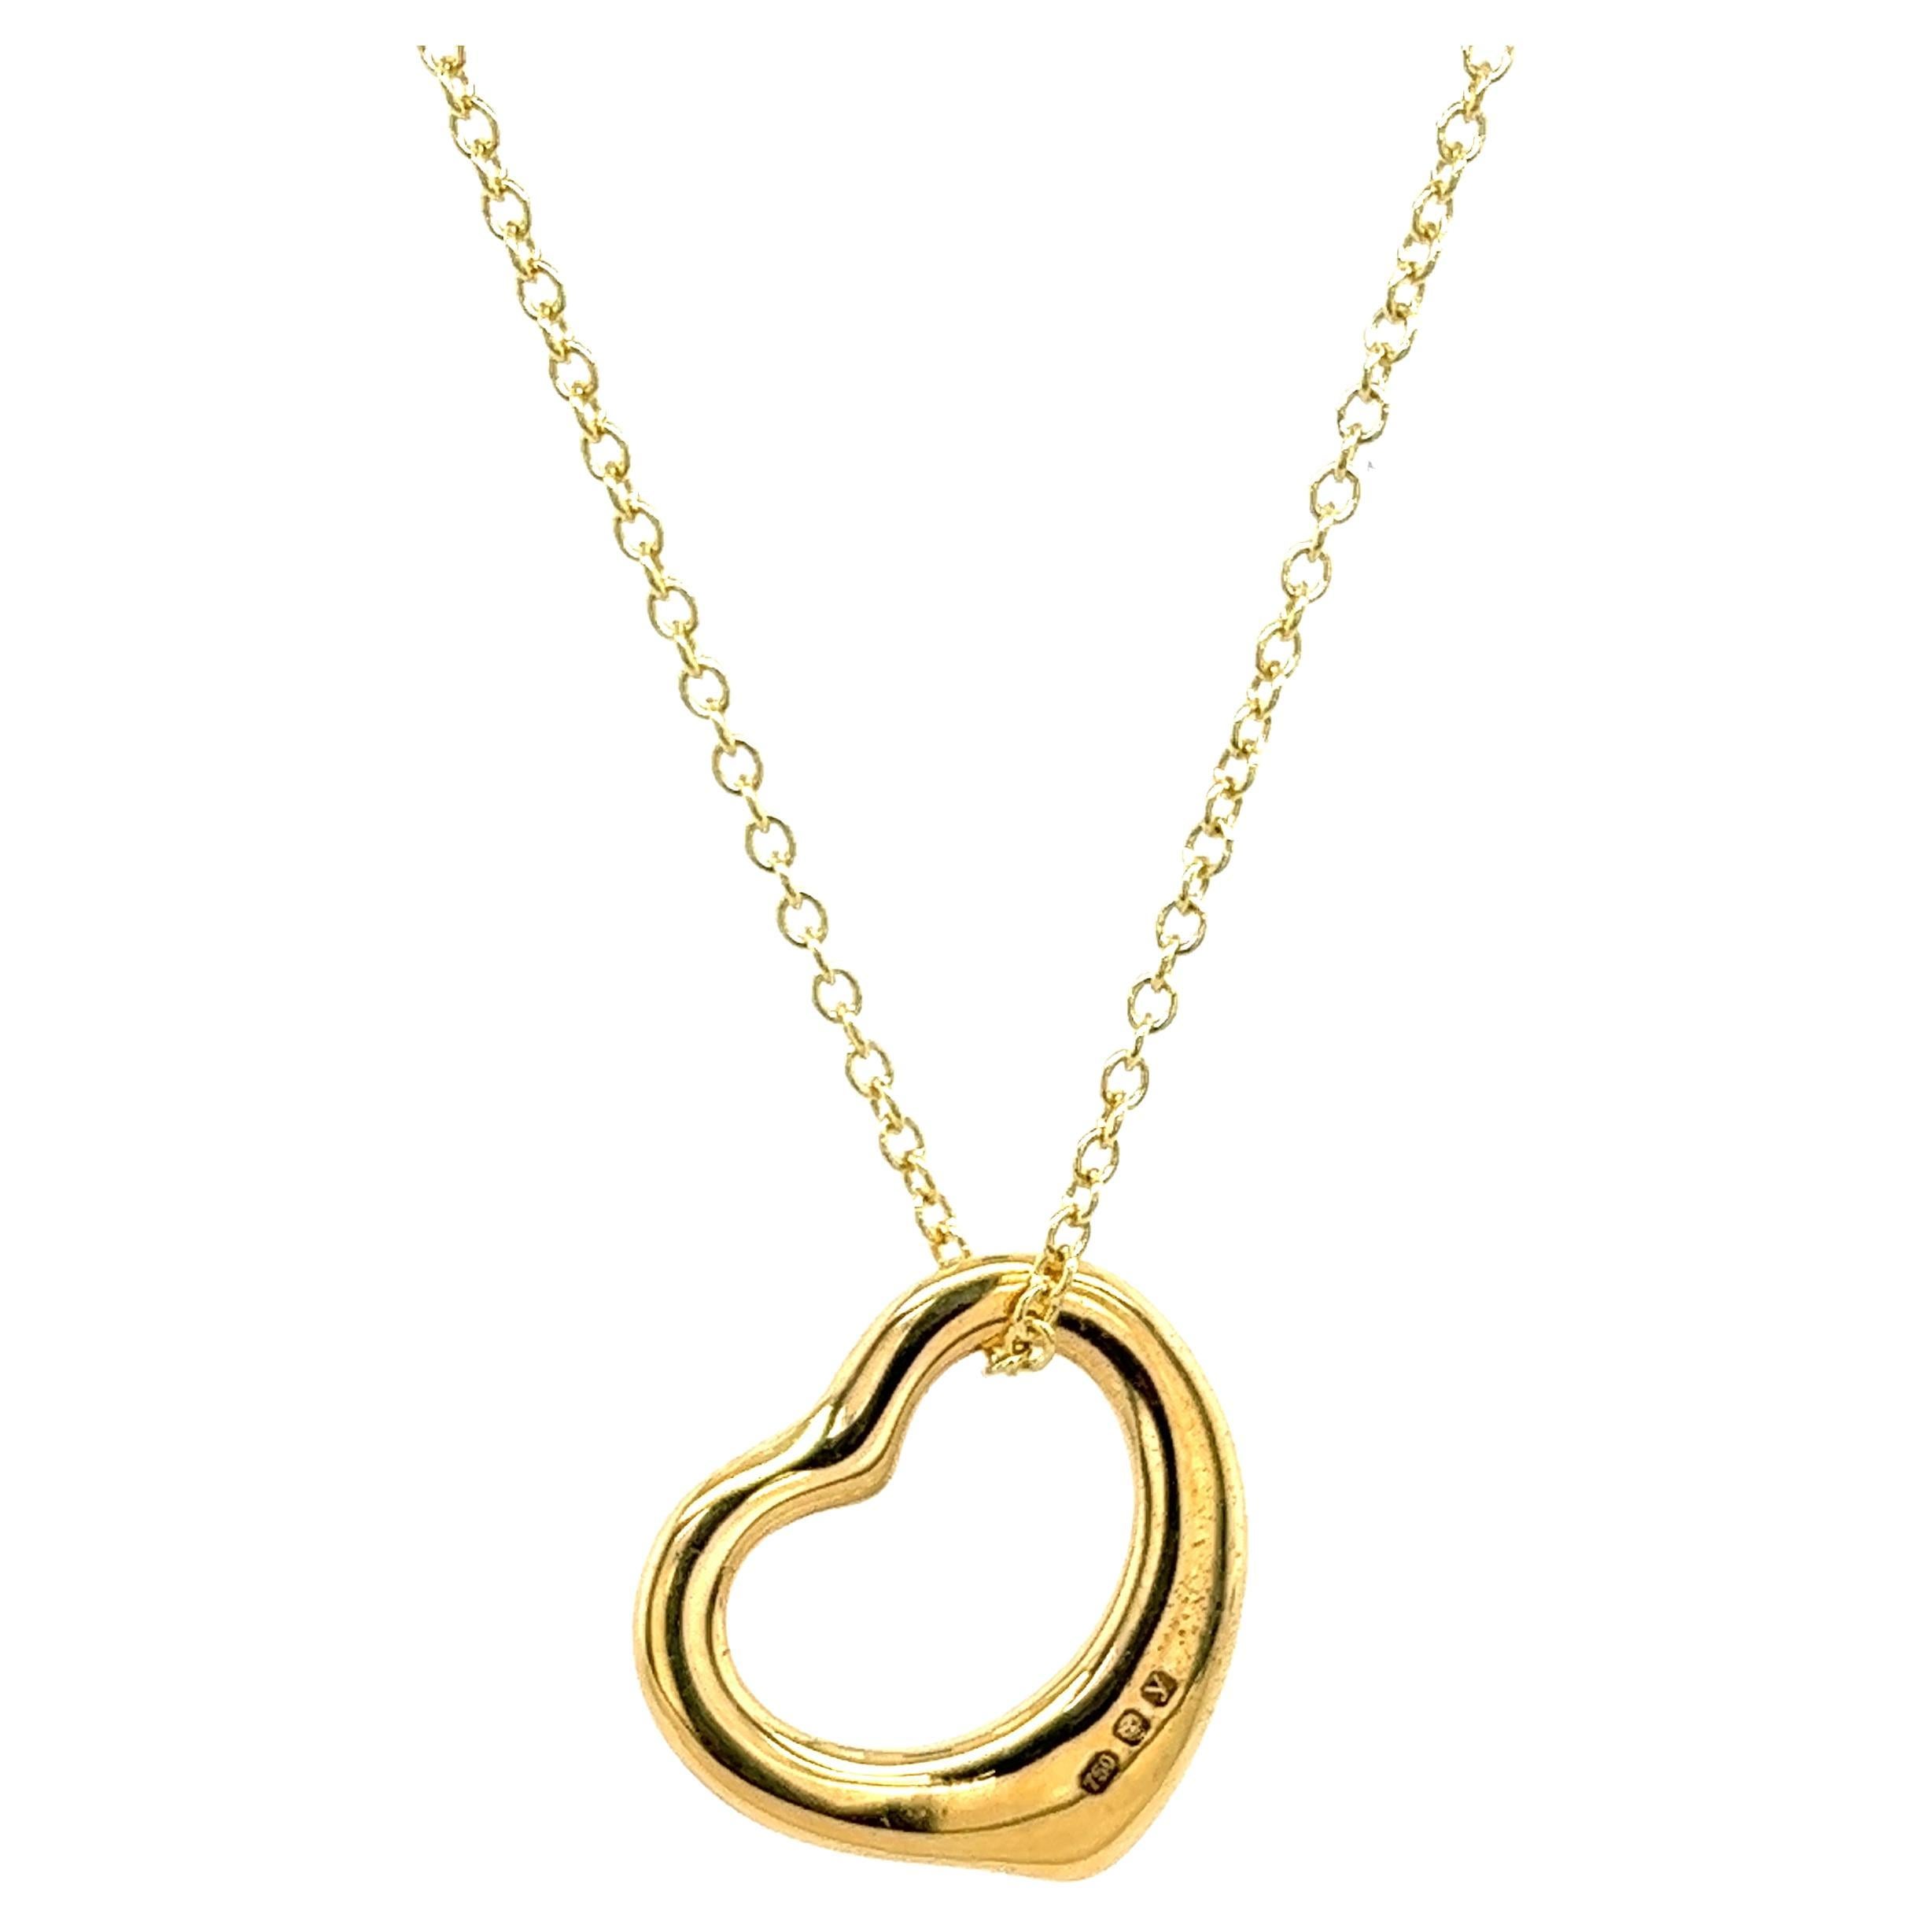 A beautiful 18ct Yellow gold heart shape pendant suspended from a 20